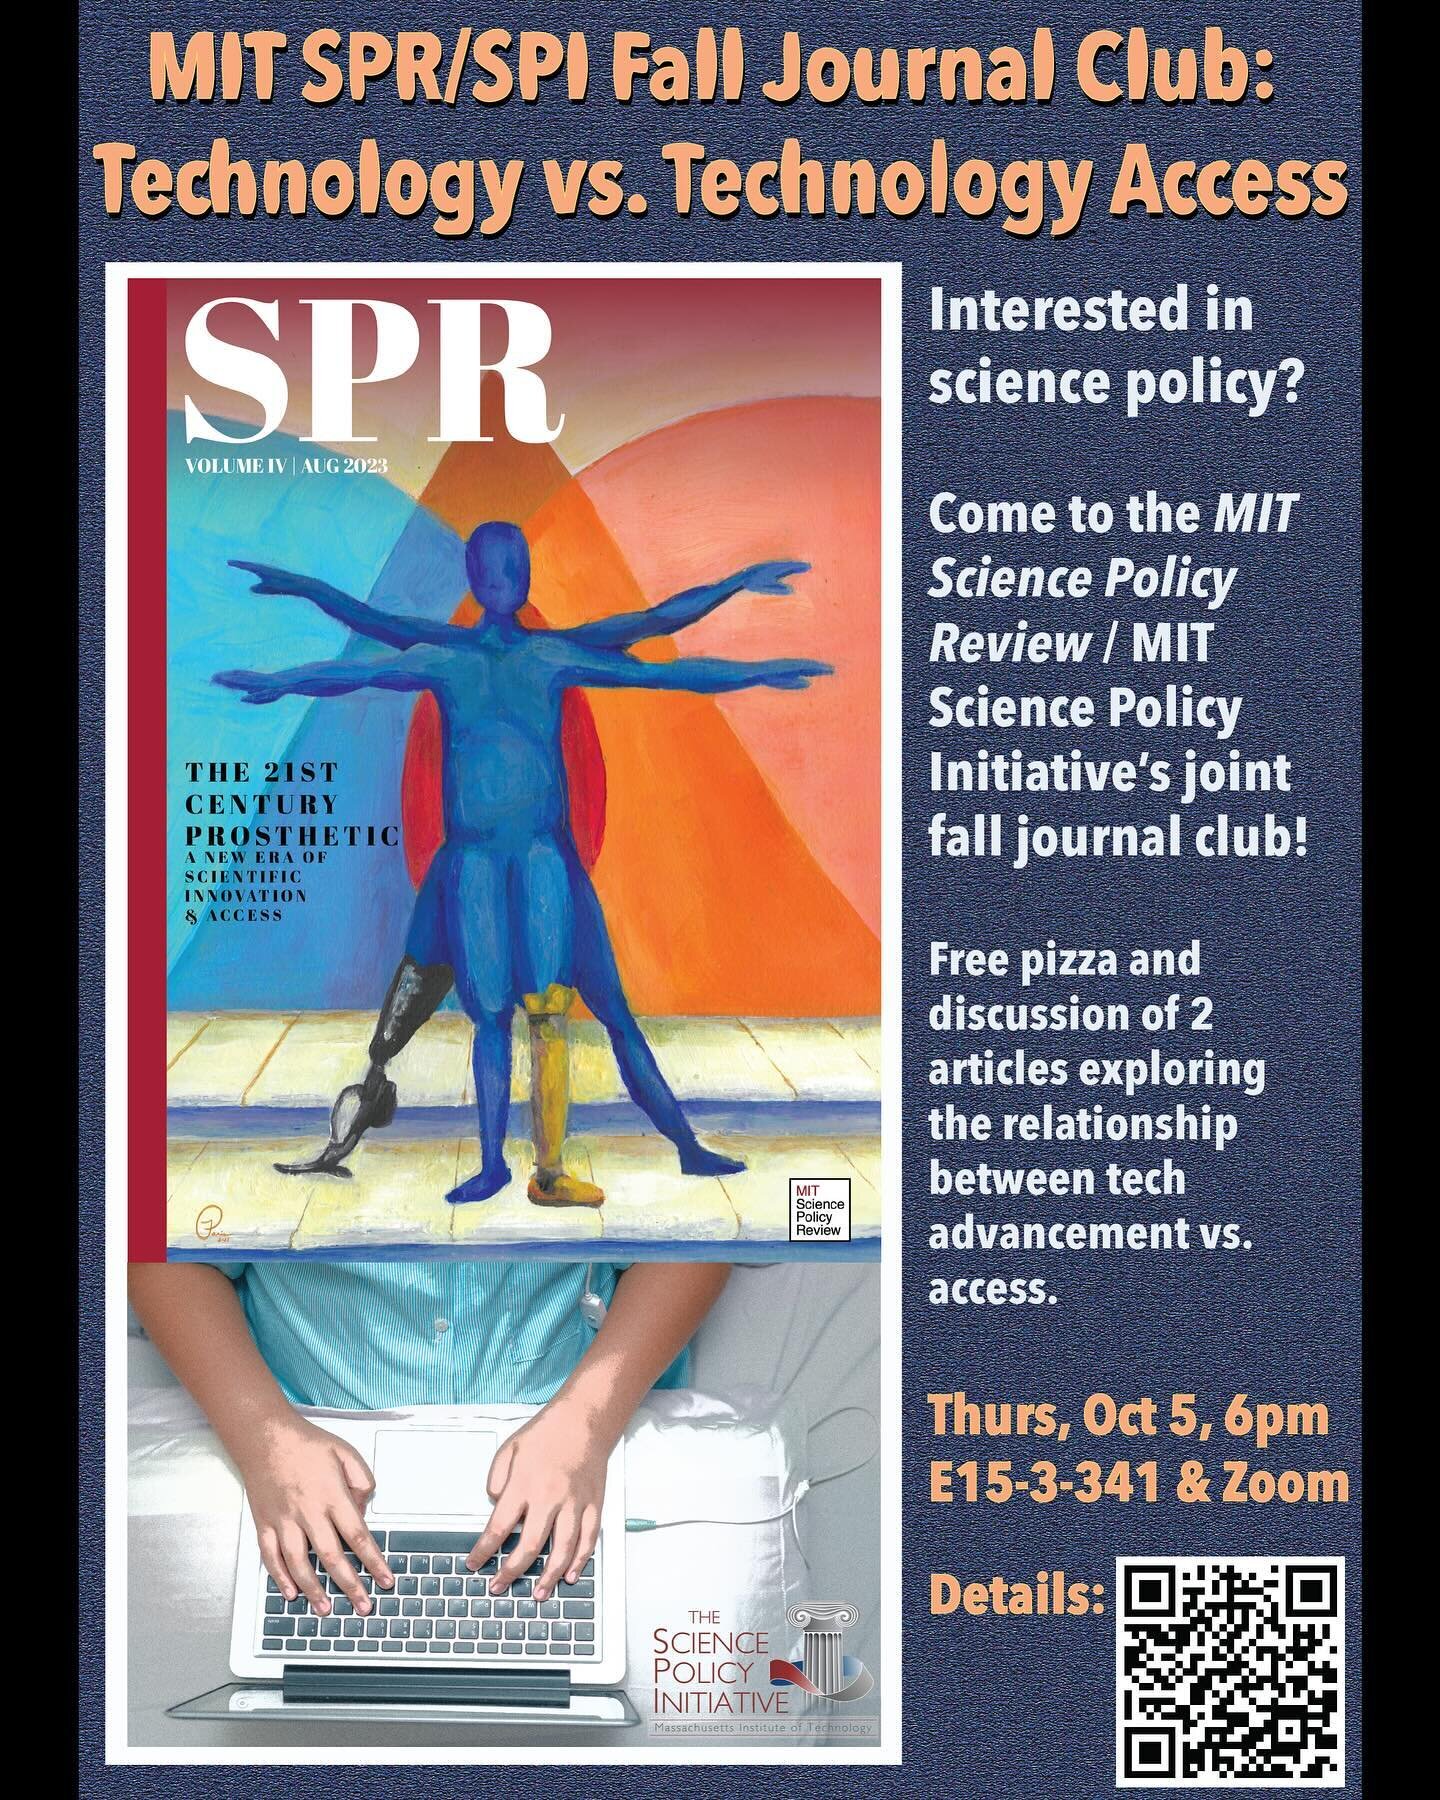 MIT SPI is excited to announce a fall journal club we&rsquo;re hosting in collaboration with @mit_spr focused on access to technology! Join us on October 5th for free pizza and a discussion of prosthetics access and One Laptop Per Child. Learn more a